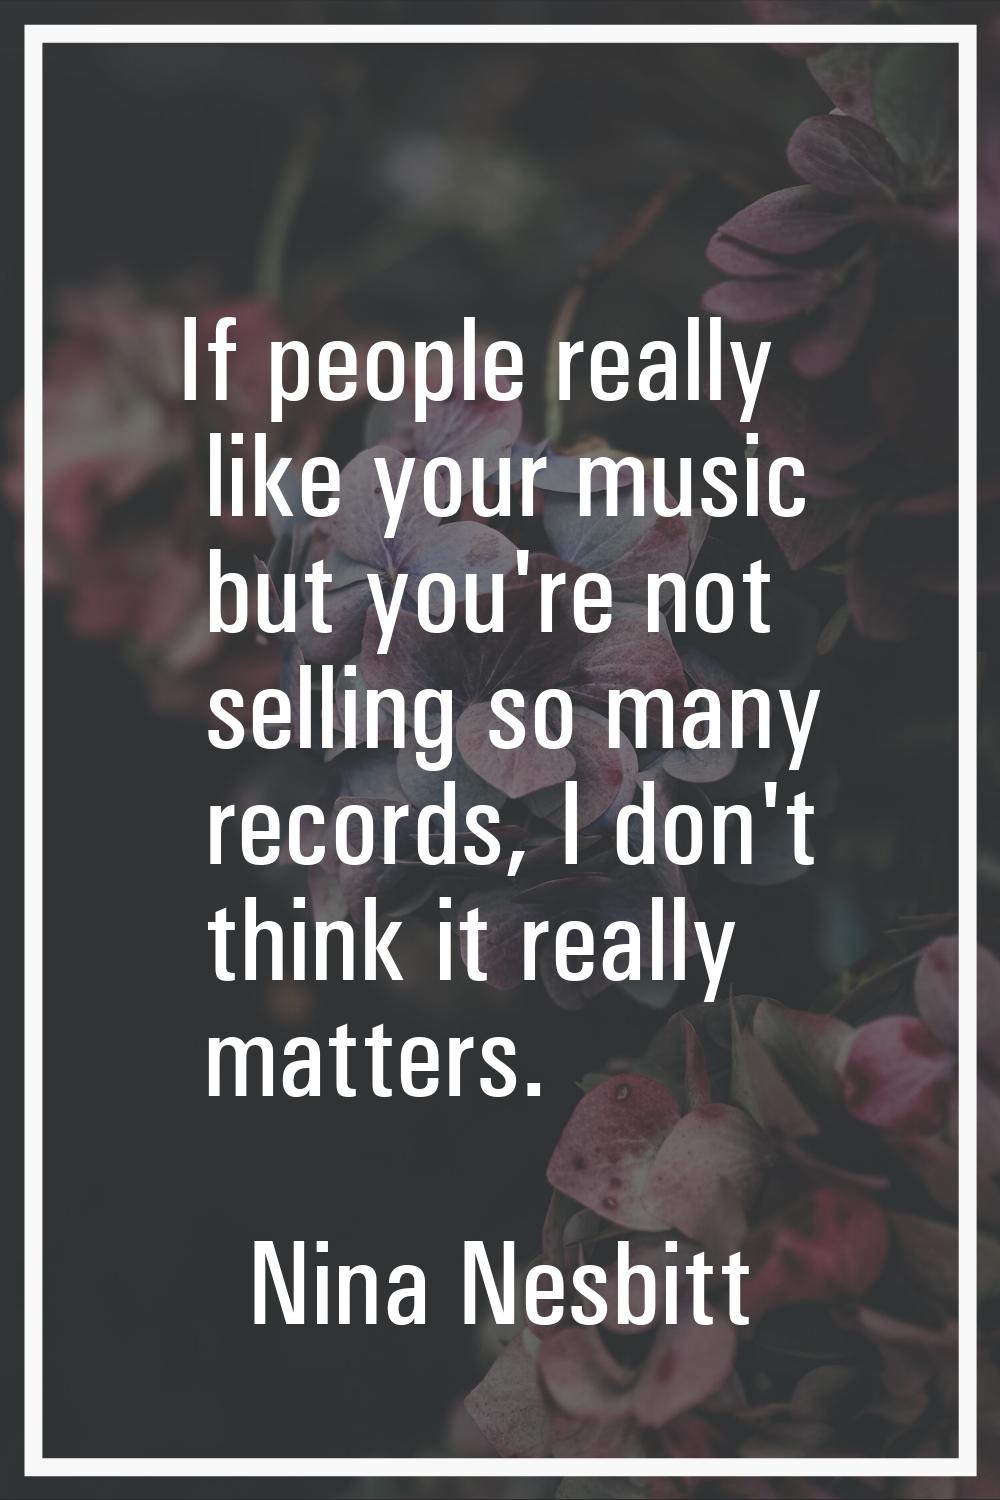 If people really like your music but you're not selling so many records, I don't think it really ma